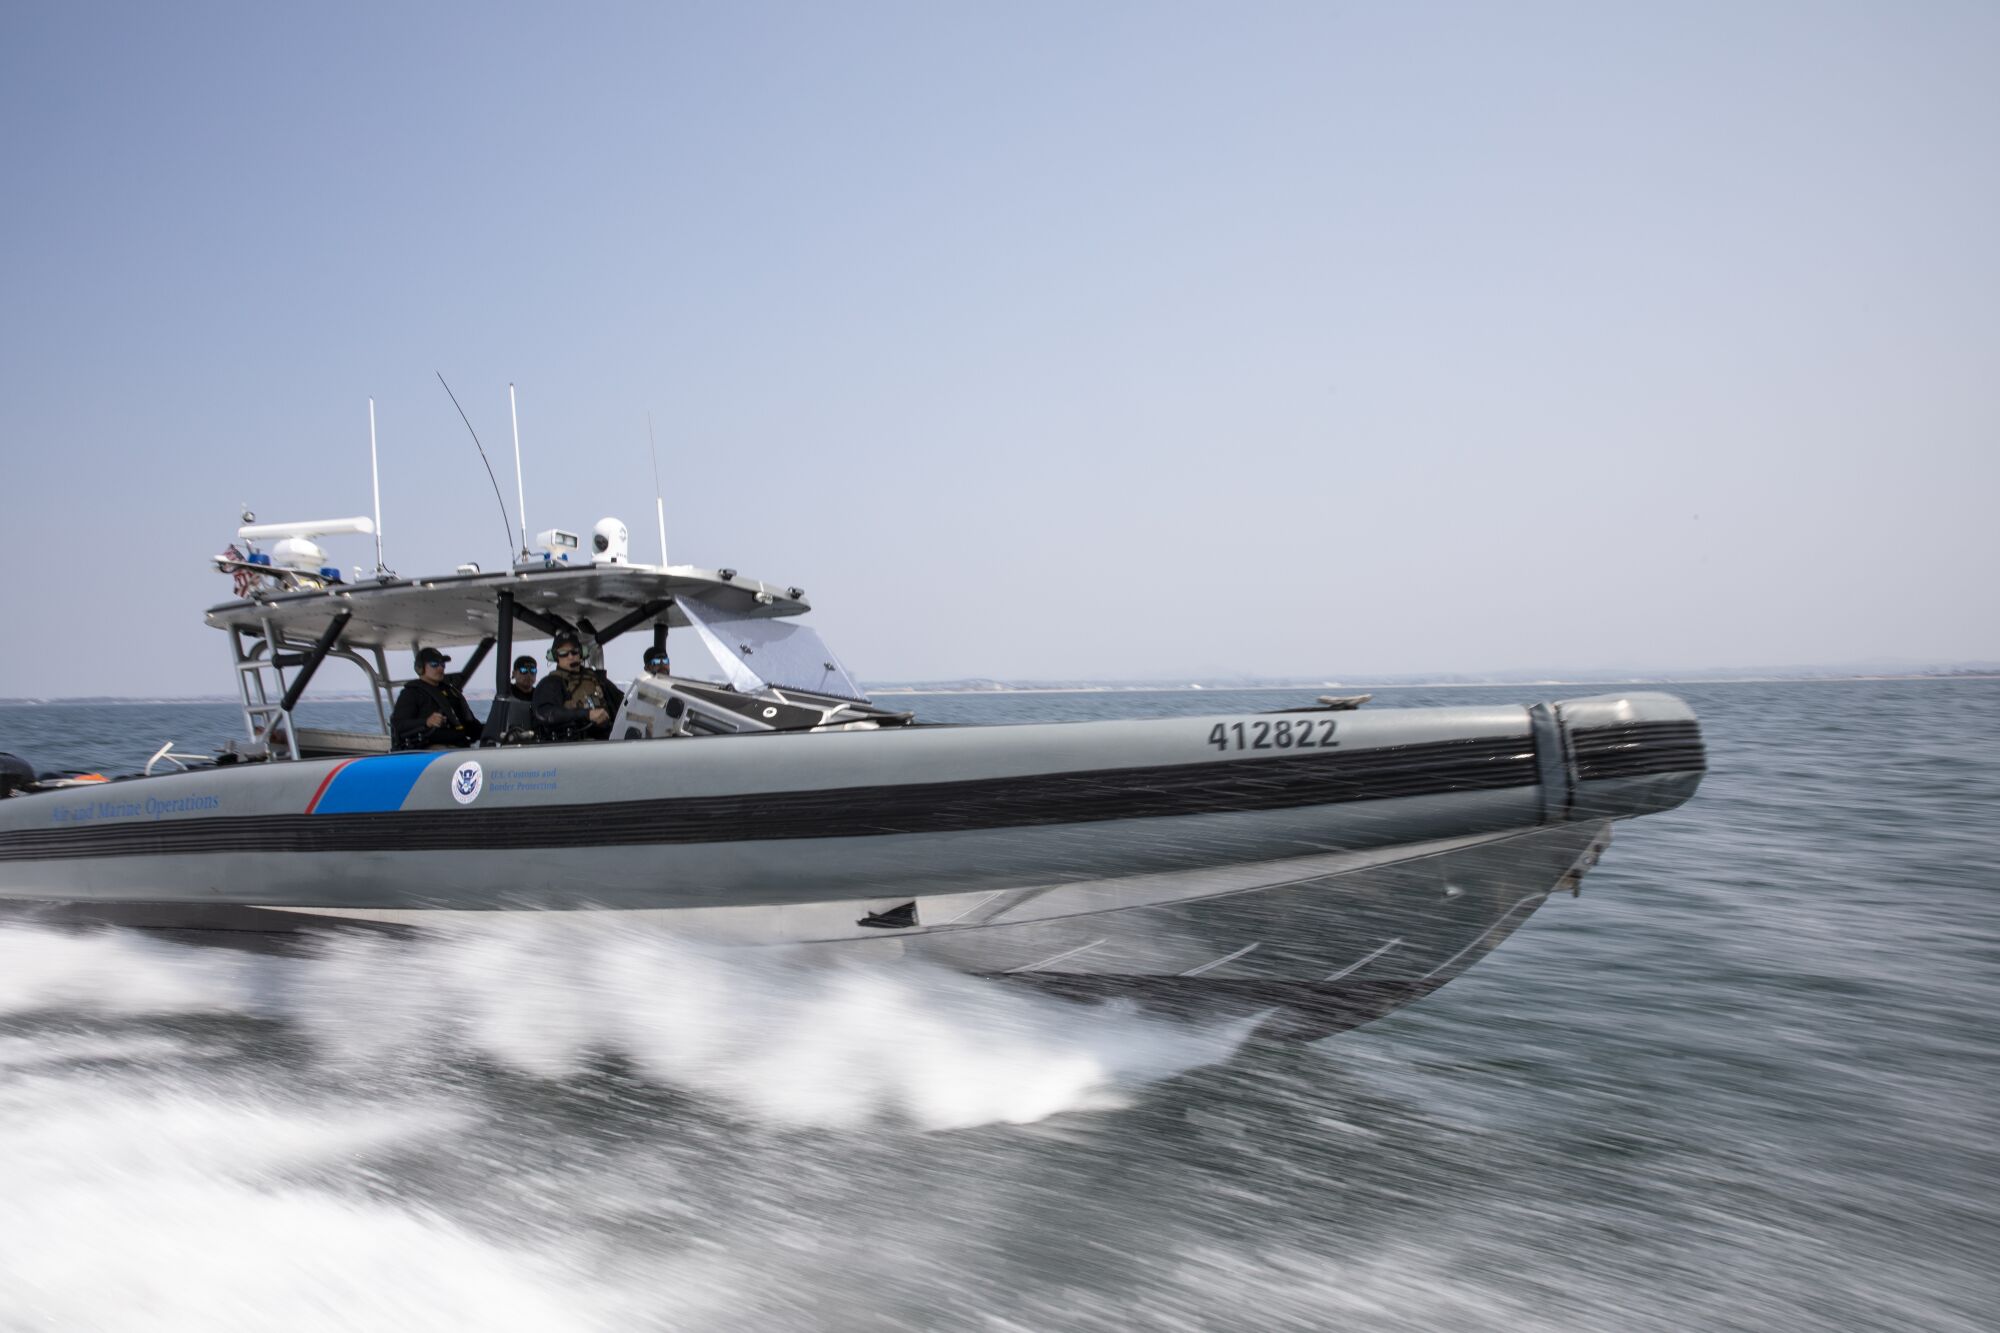 Marine interdiction agents in a boat in the water